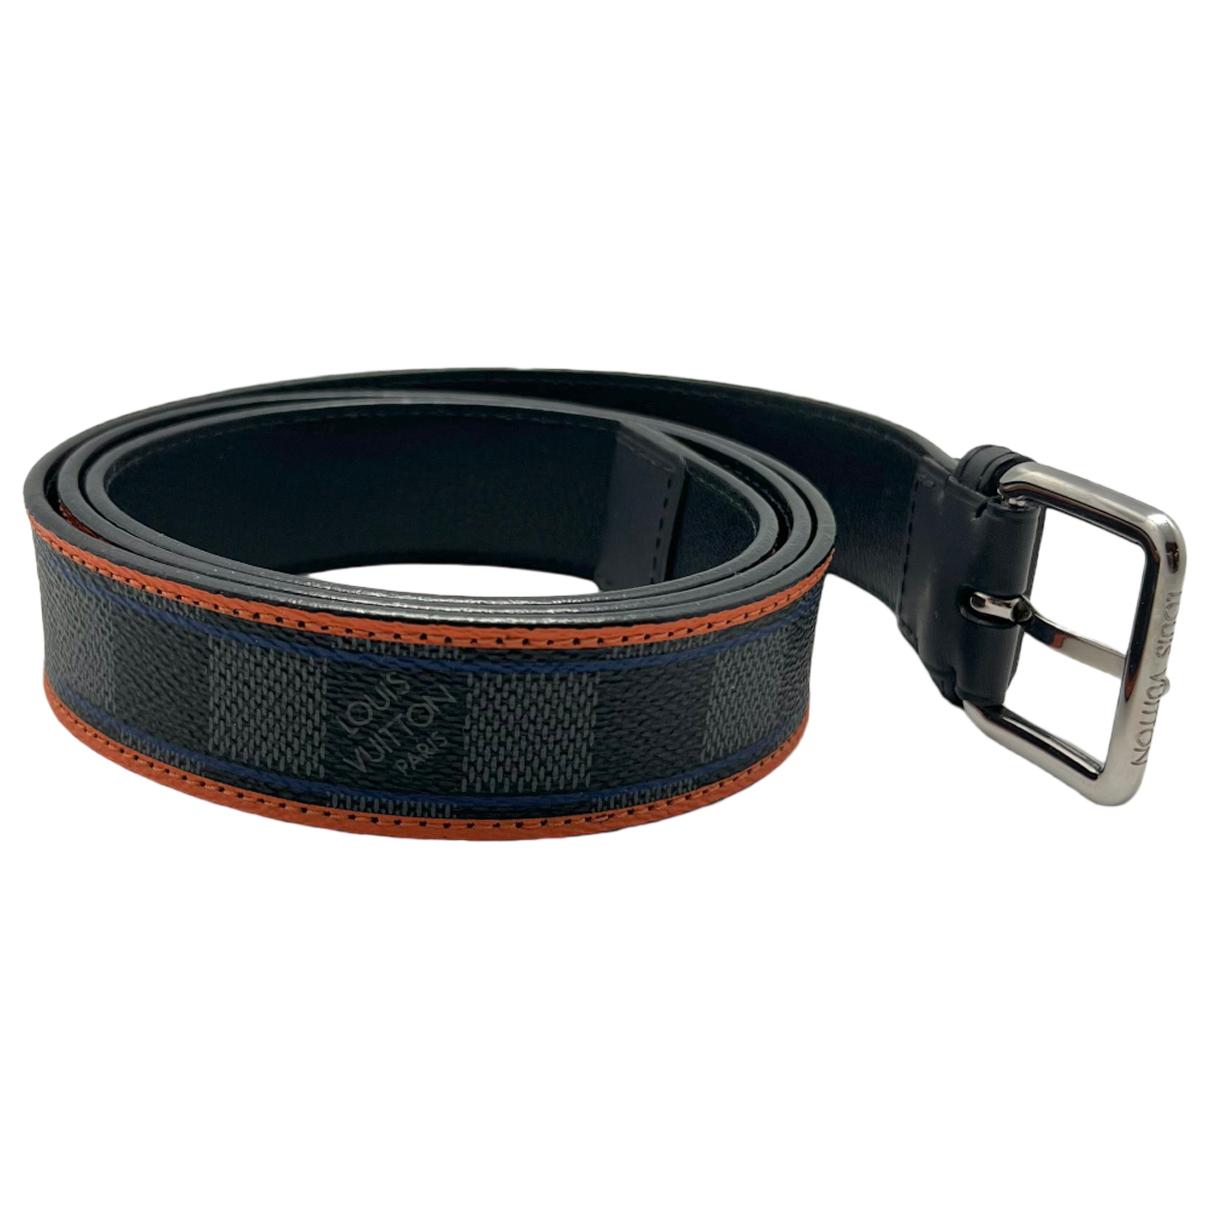 Initiales leather belt Louis Vuitton Black size 95 cm in Leather - 32941503